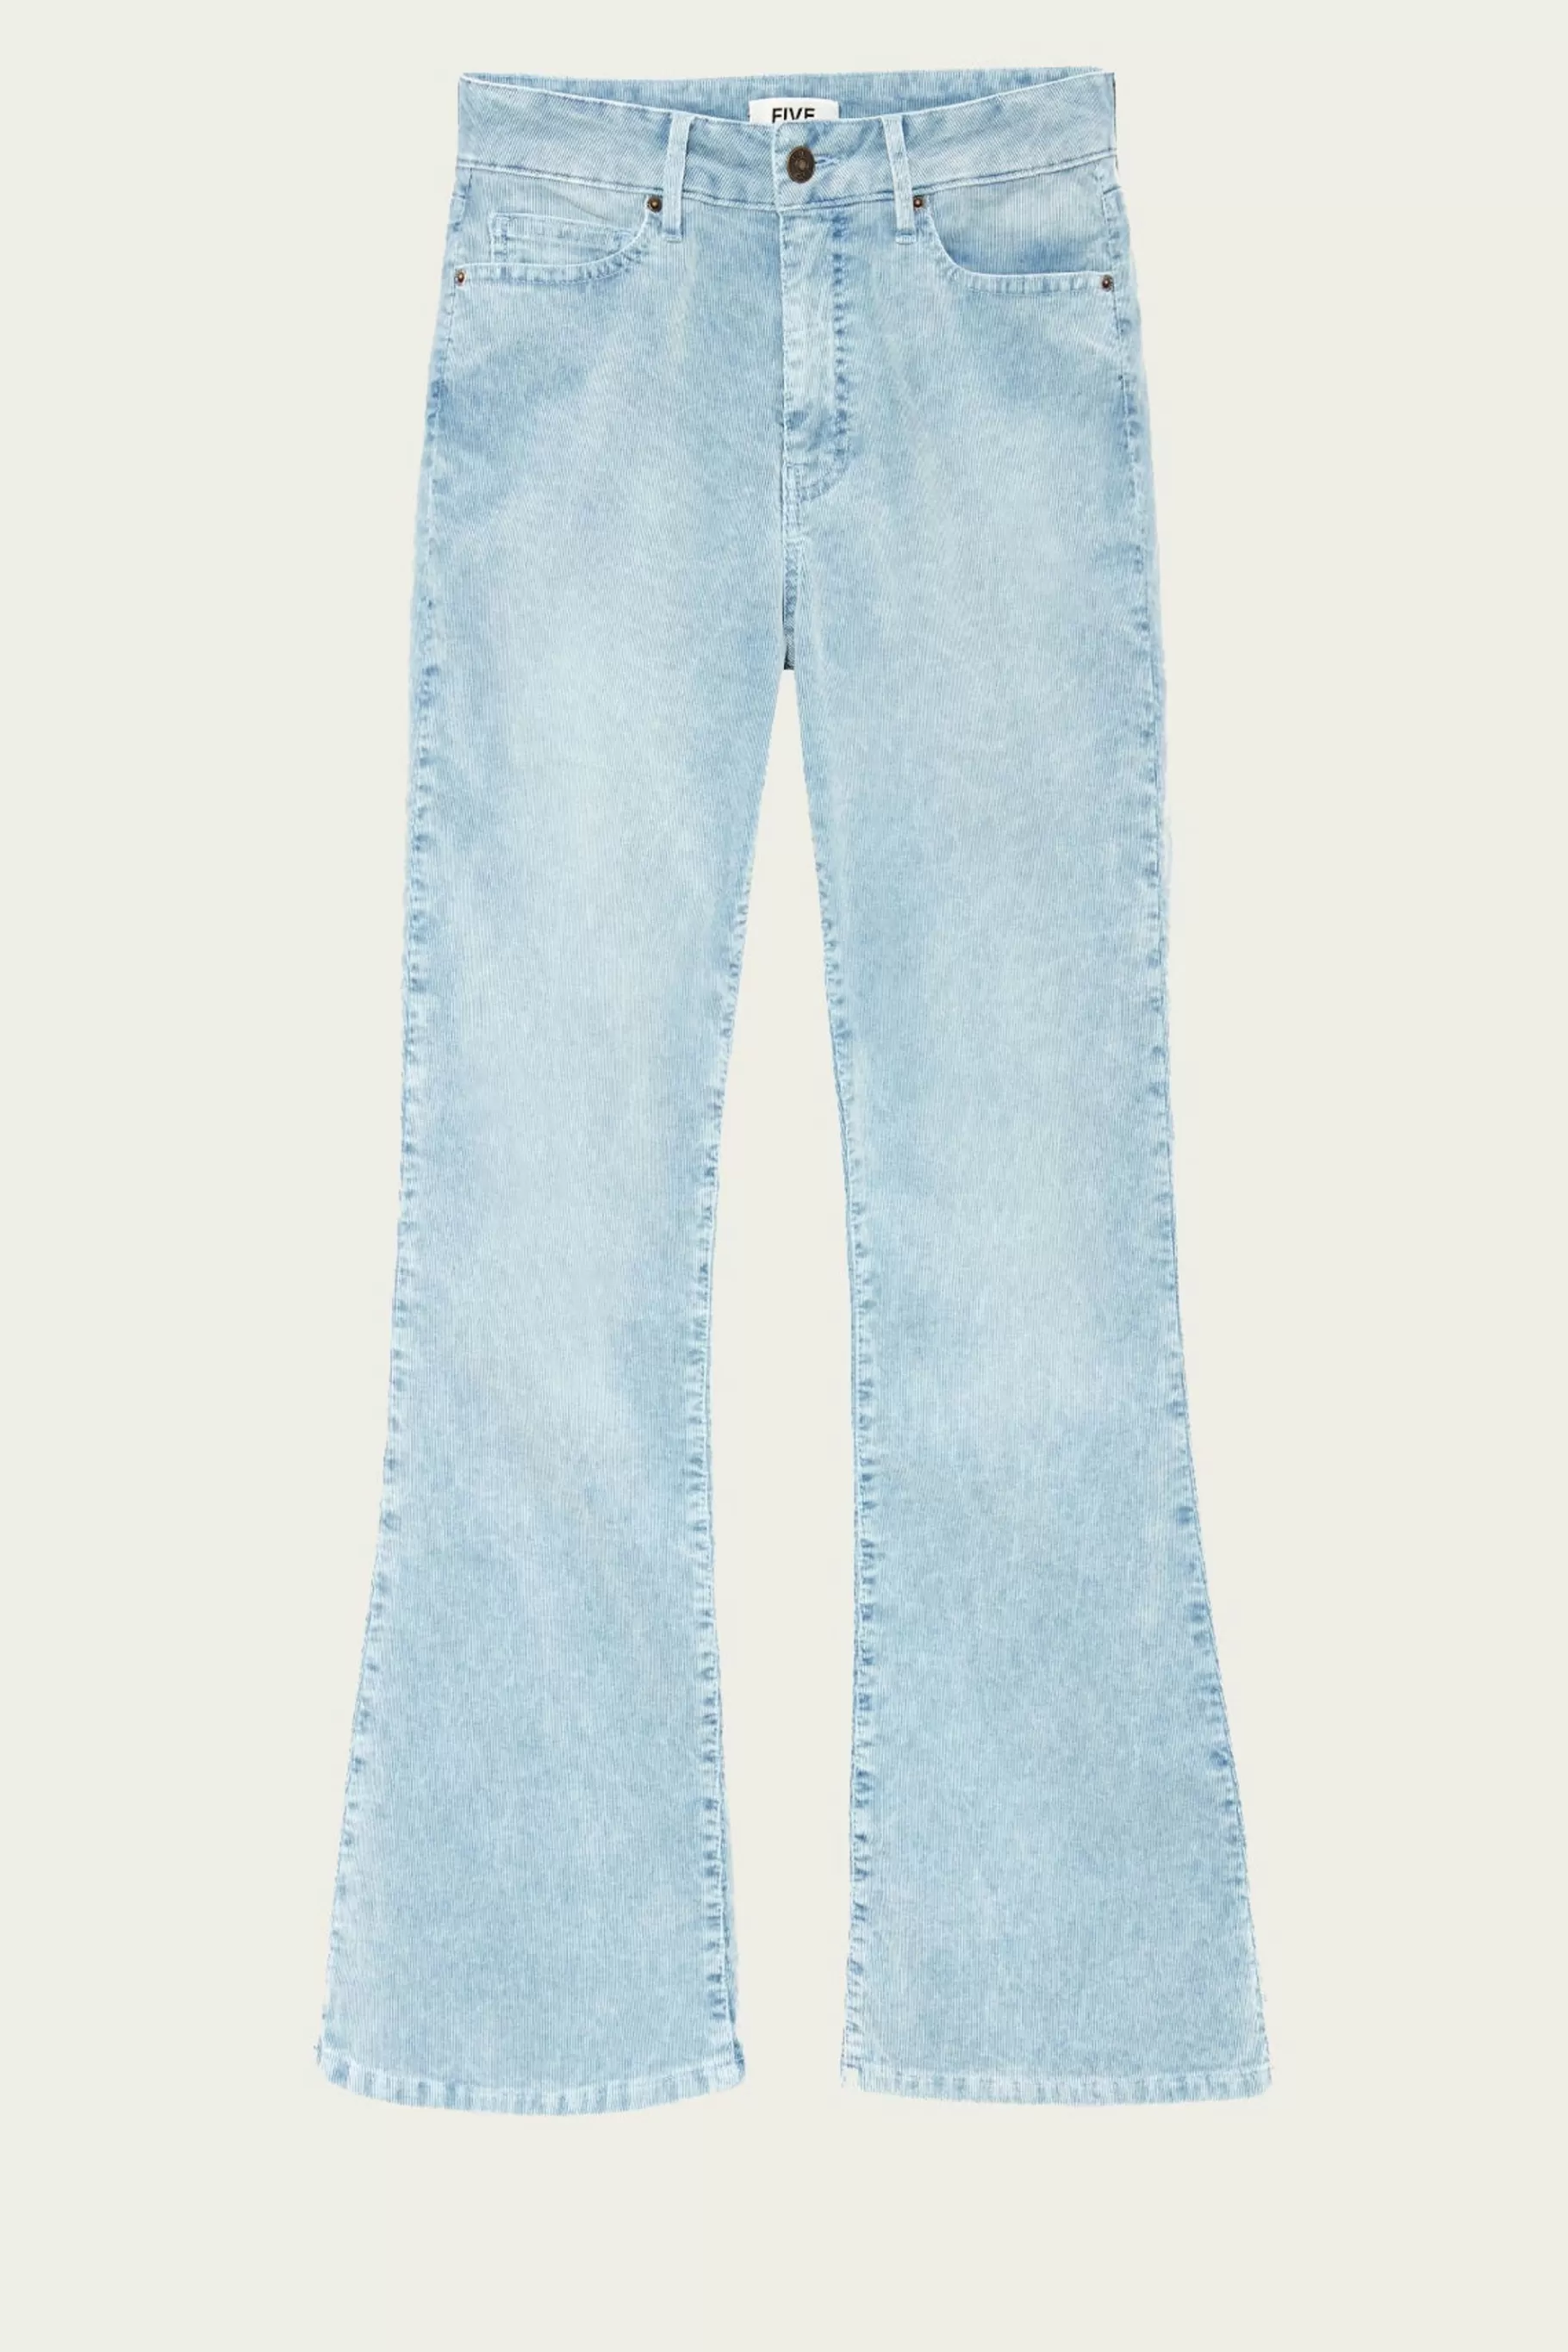 Pants-Five Jeans 597 Maylan Flare Cropped Trousers Light Blue